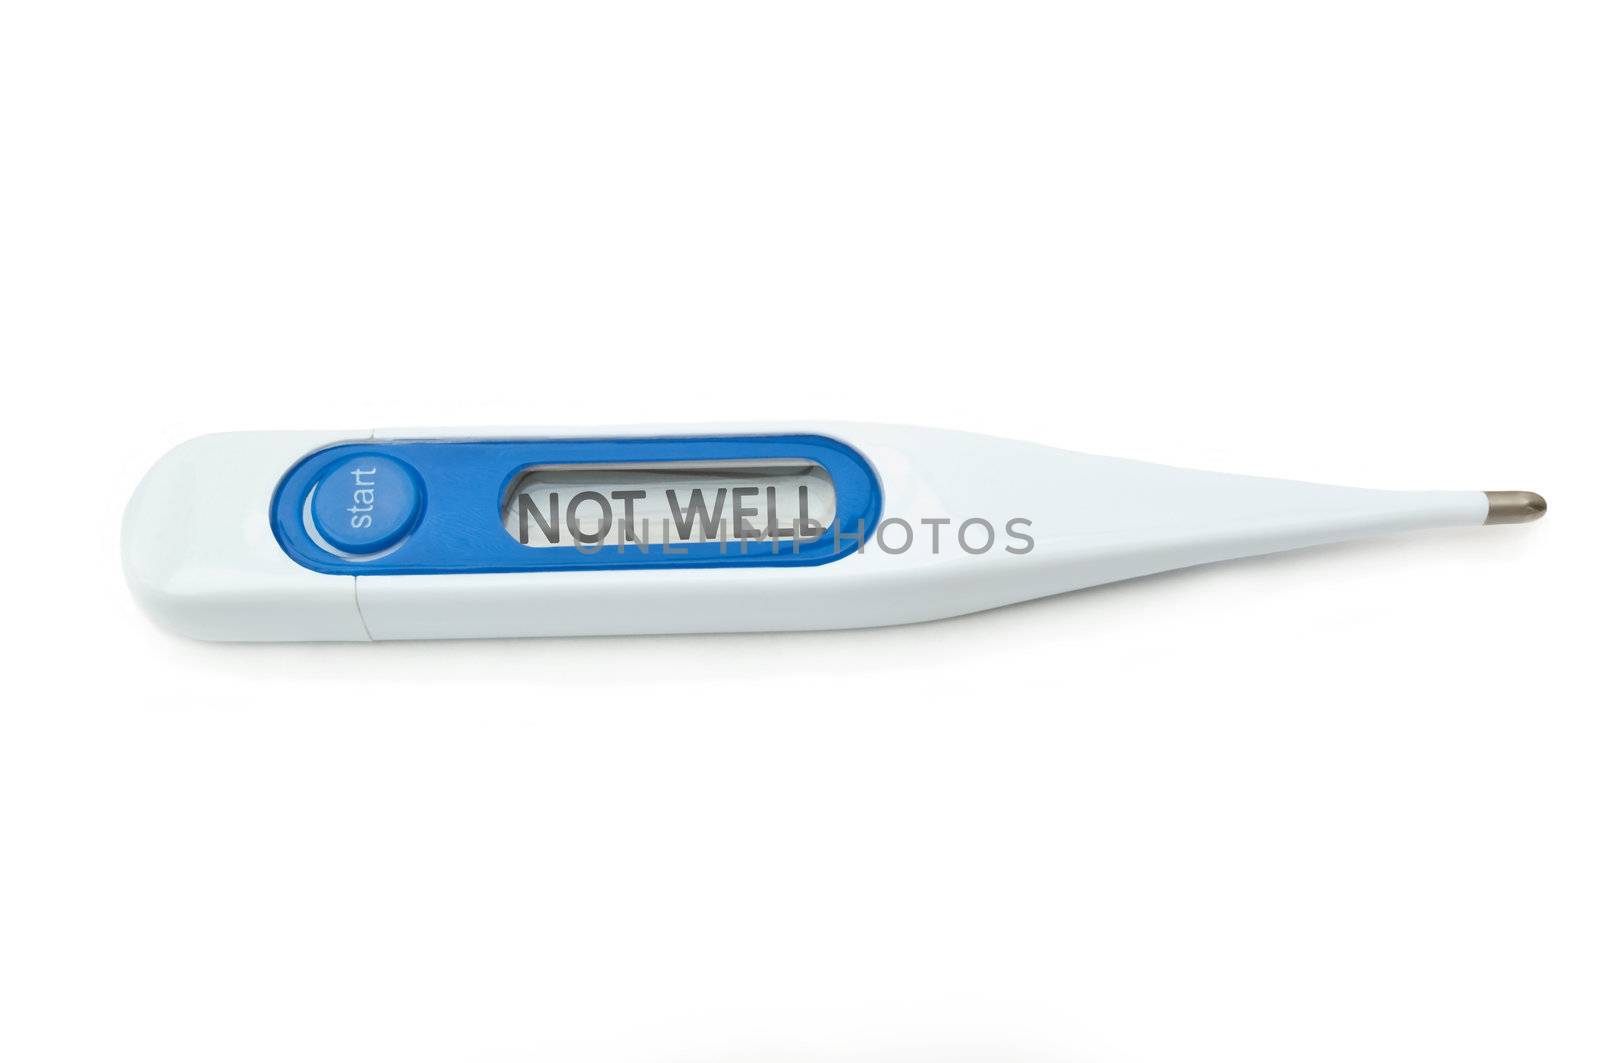 A single digital thermometer with display reading NOT WELL. White background.